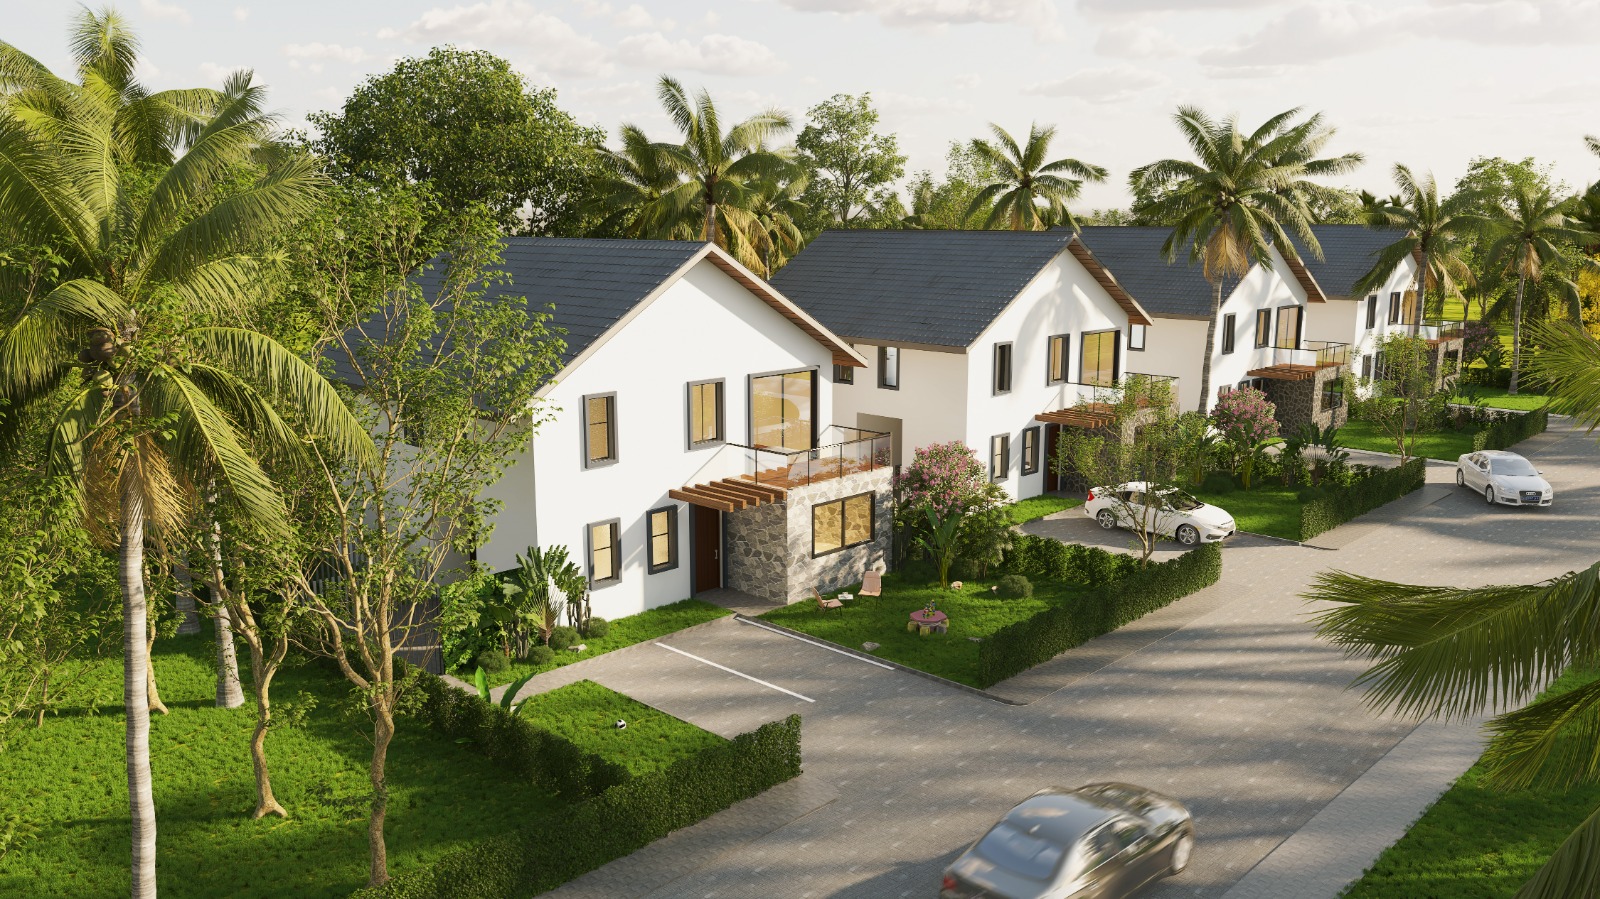 Luxury Meets Serenity, Spacious Shangrila Villas For Sale Rongai along Maasai Lodge Rd From Ksh. 18.5m